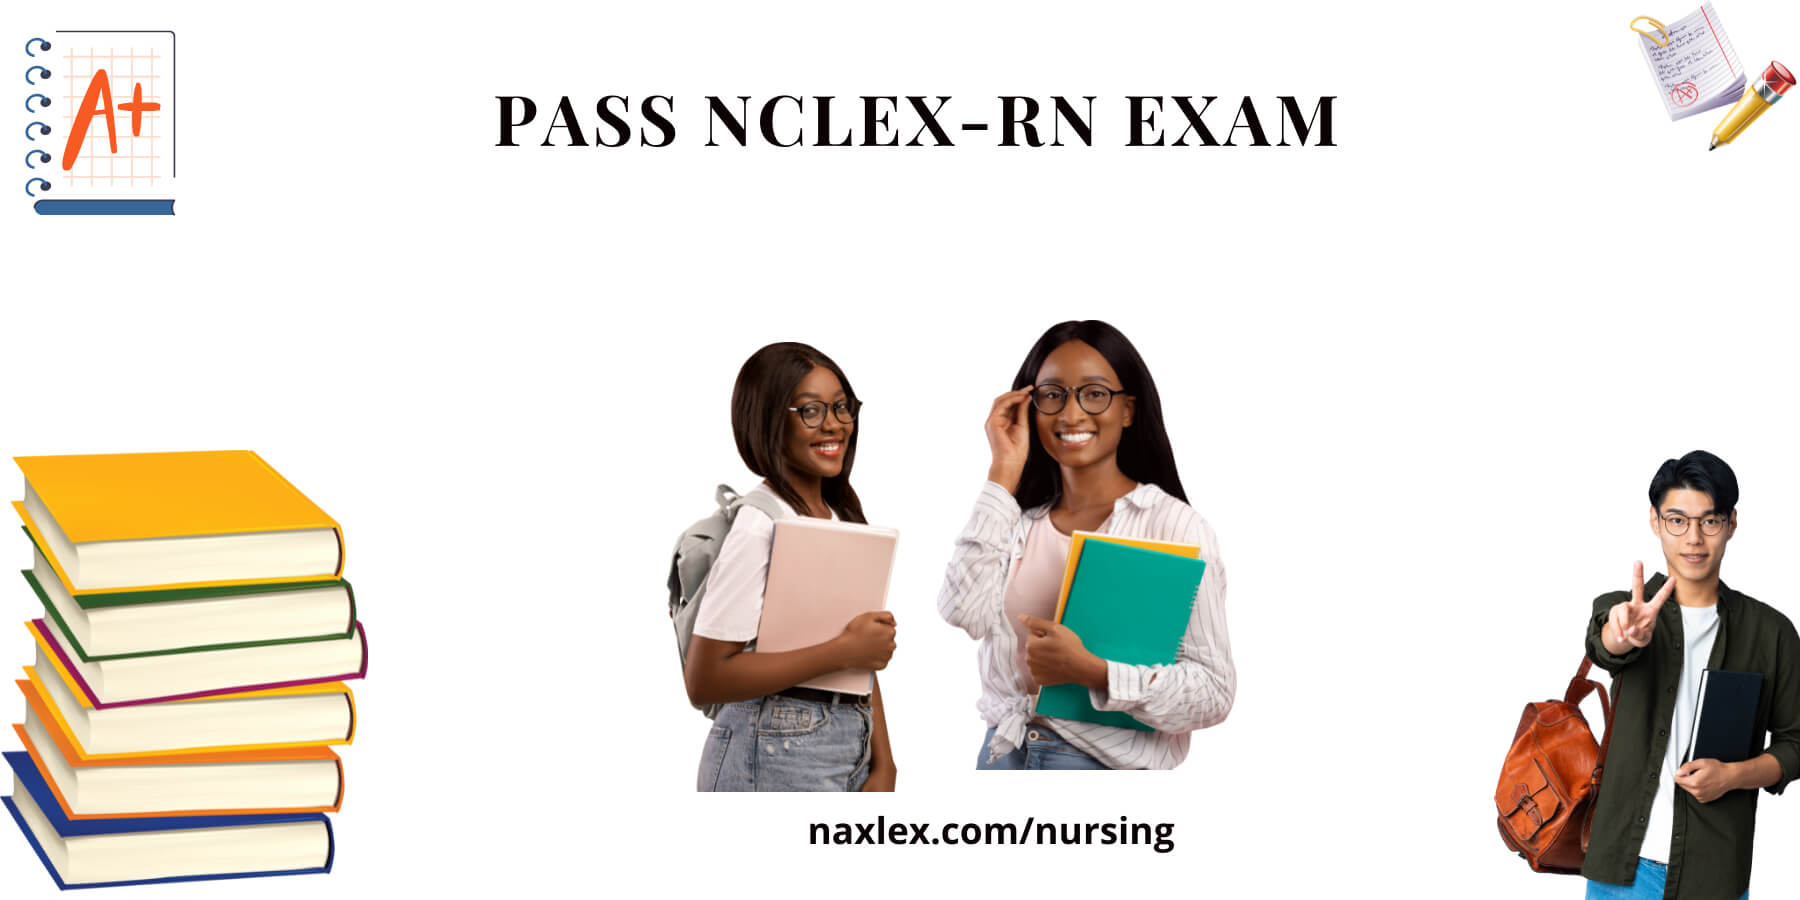 How to Pass the NCLEX-RN Exam